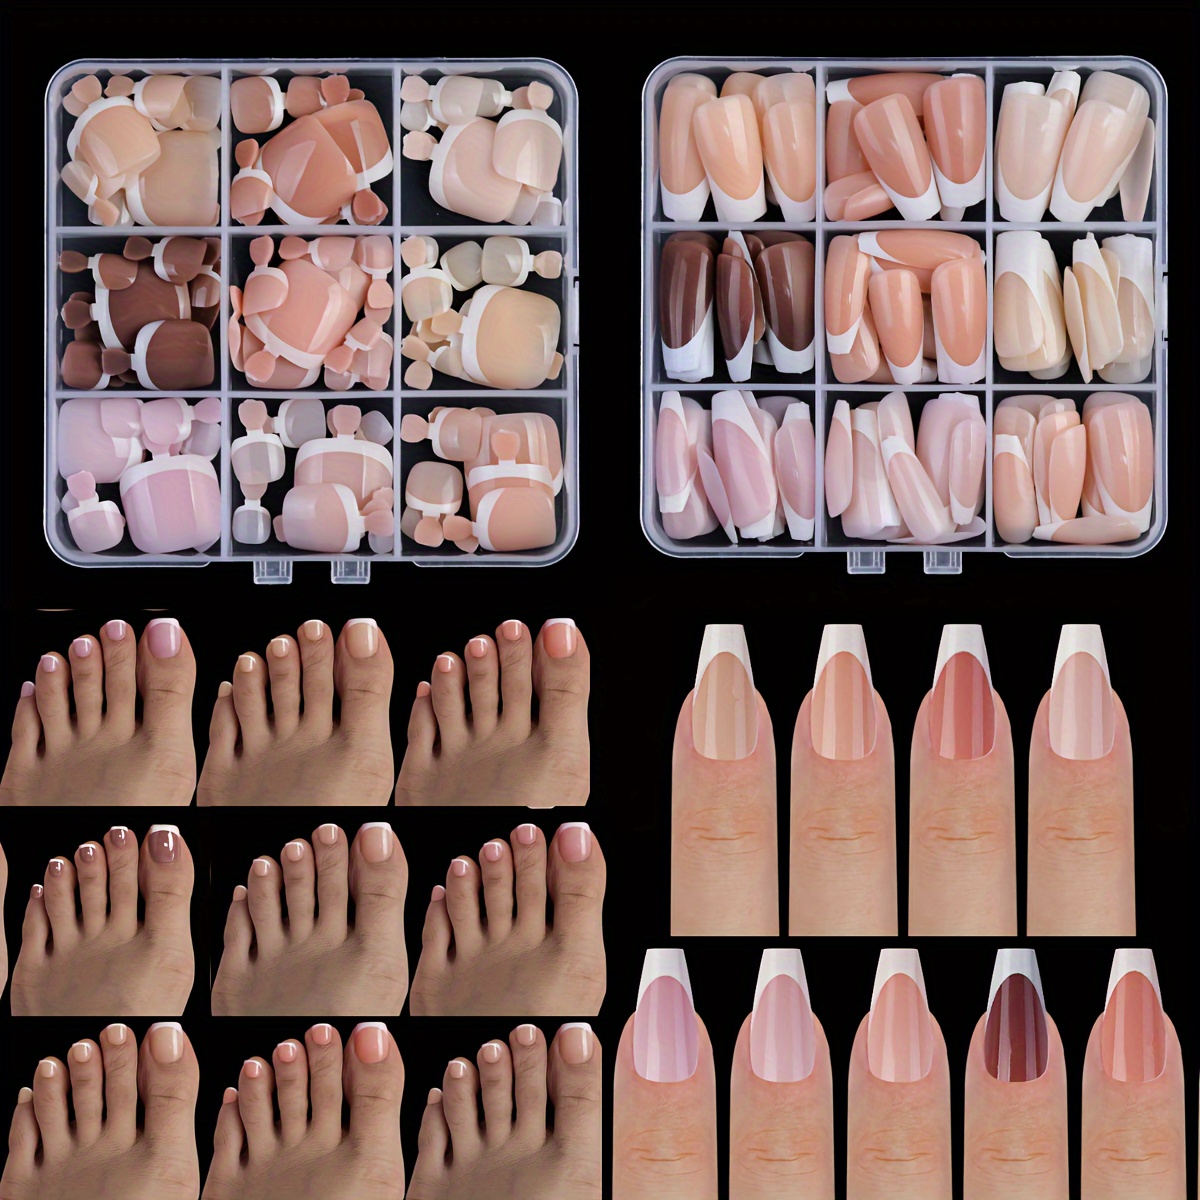 

108-piece Acrylic French Tip Press-on Nails & Toenails Set - Mixed Colors, Medium Square Shape For Diy Manicure And Pedicure Kit With Storage Box